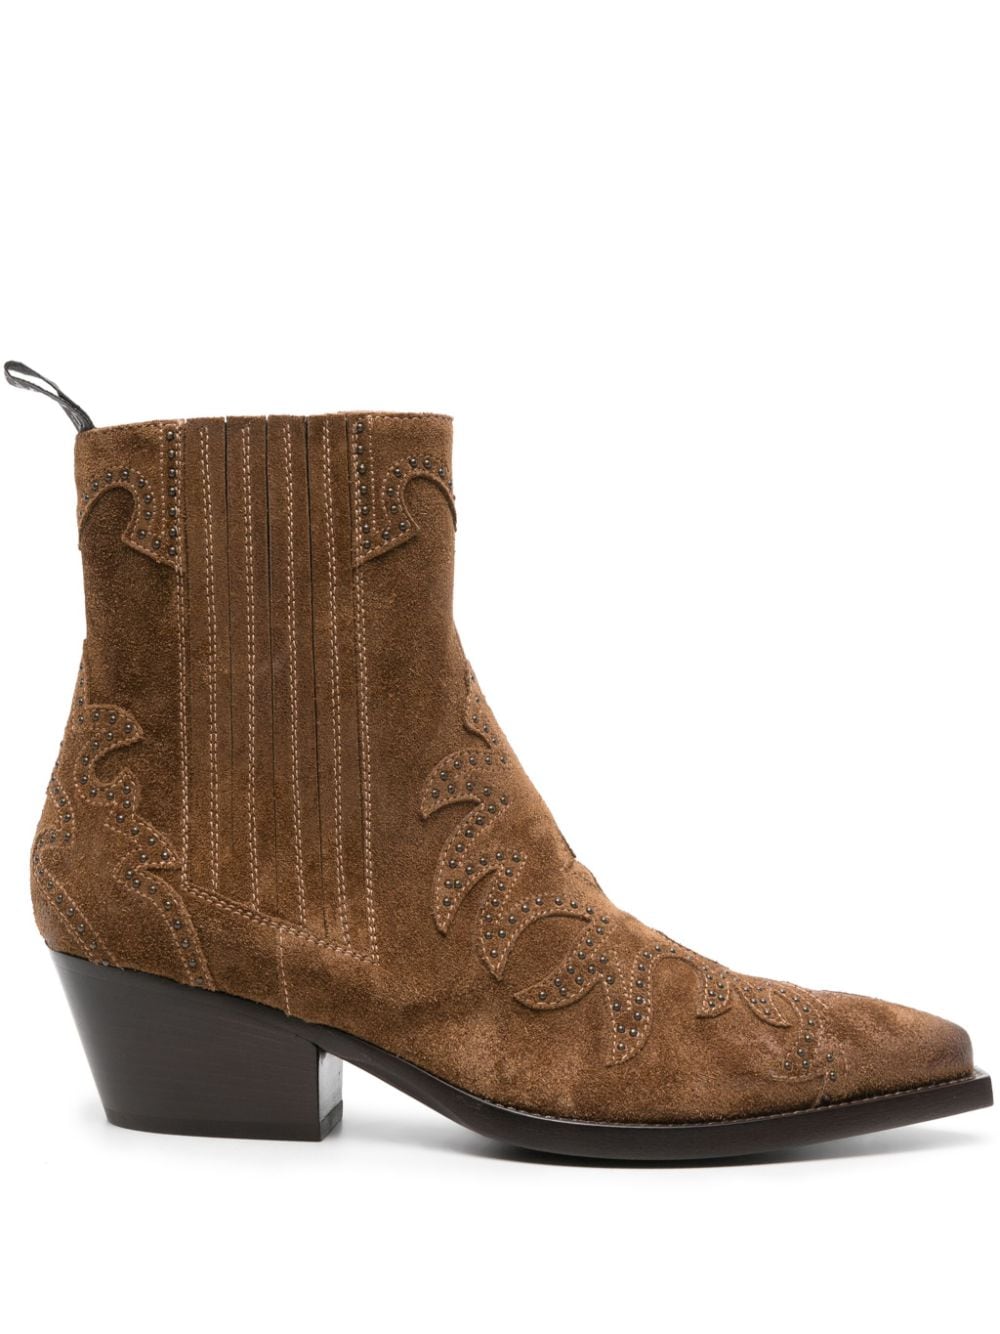 Sartore 50mm suede ankle boots - Marrone